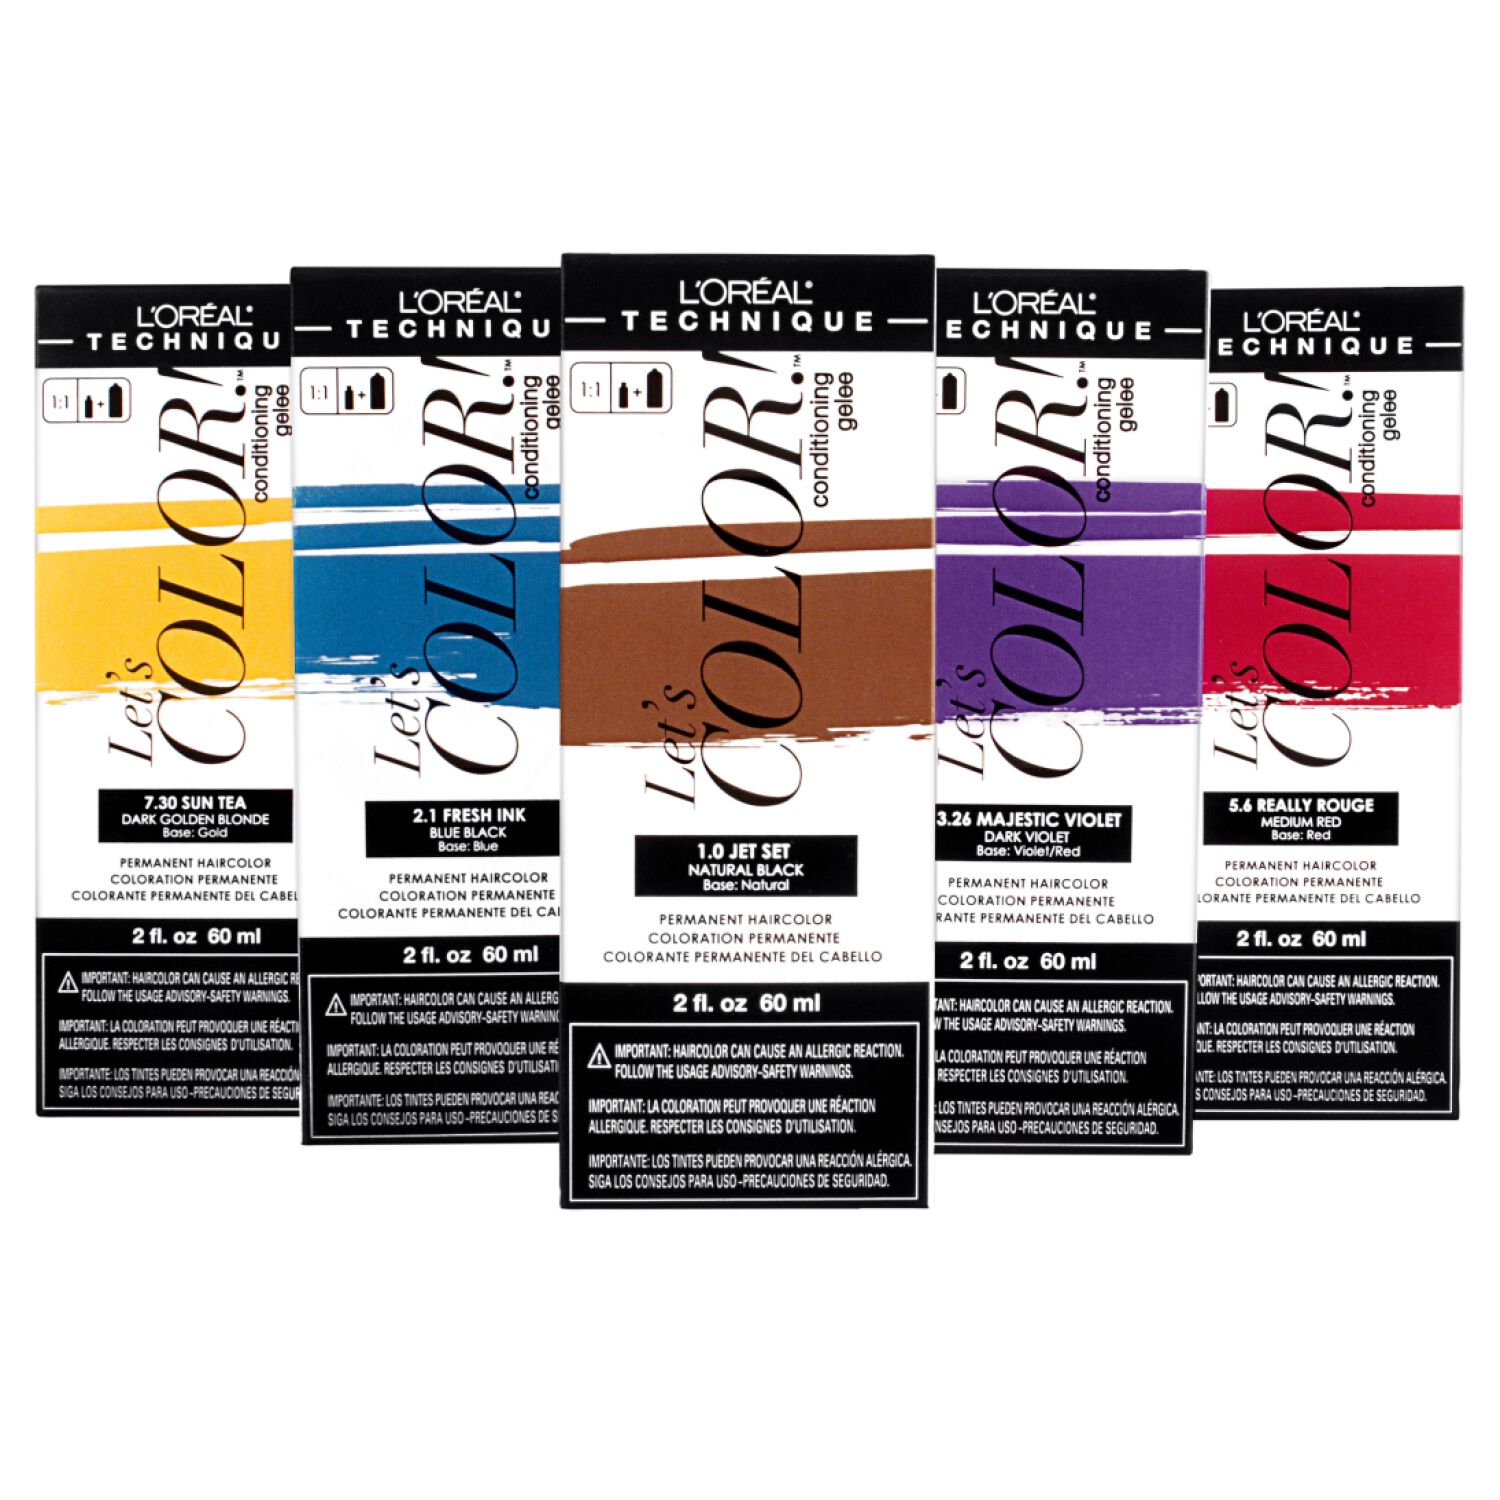 L'Oreal Let's COLOR! Conditioning Gelee Permanent Hair Color